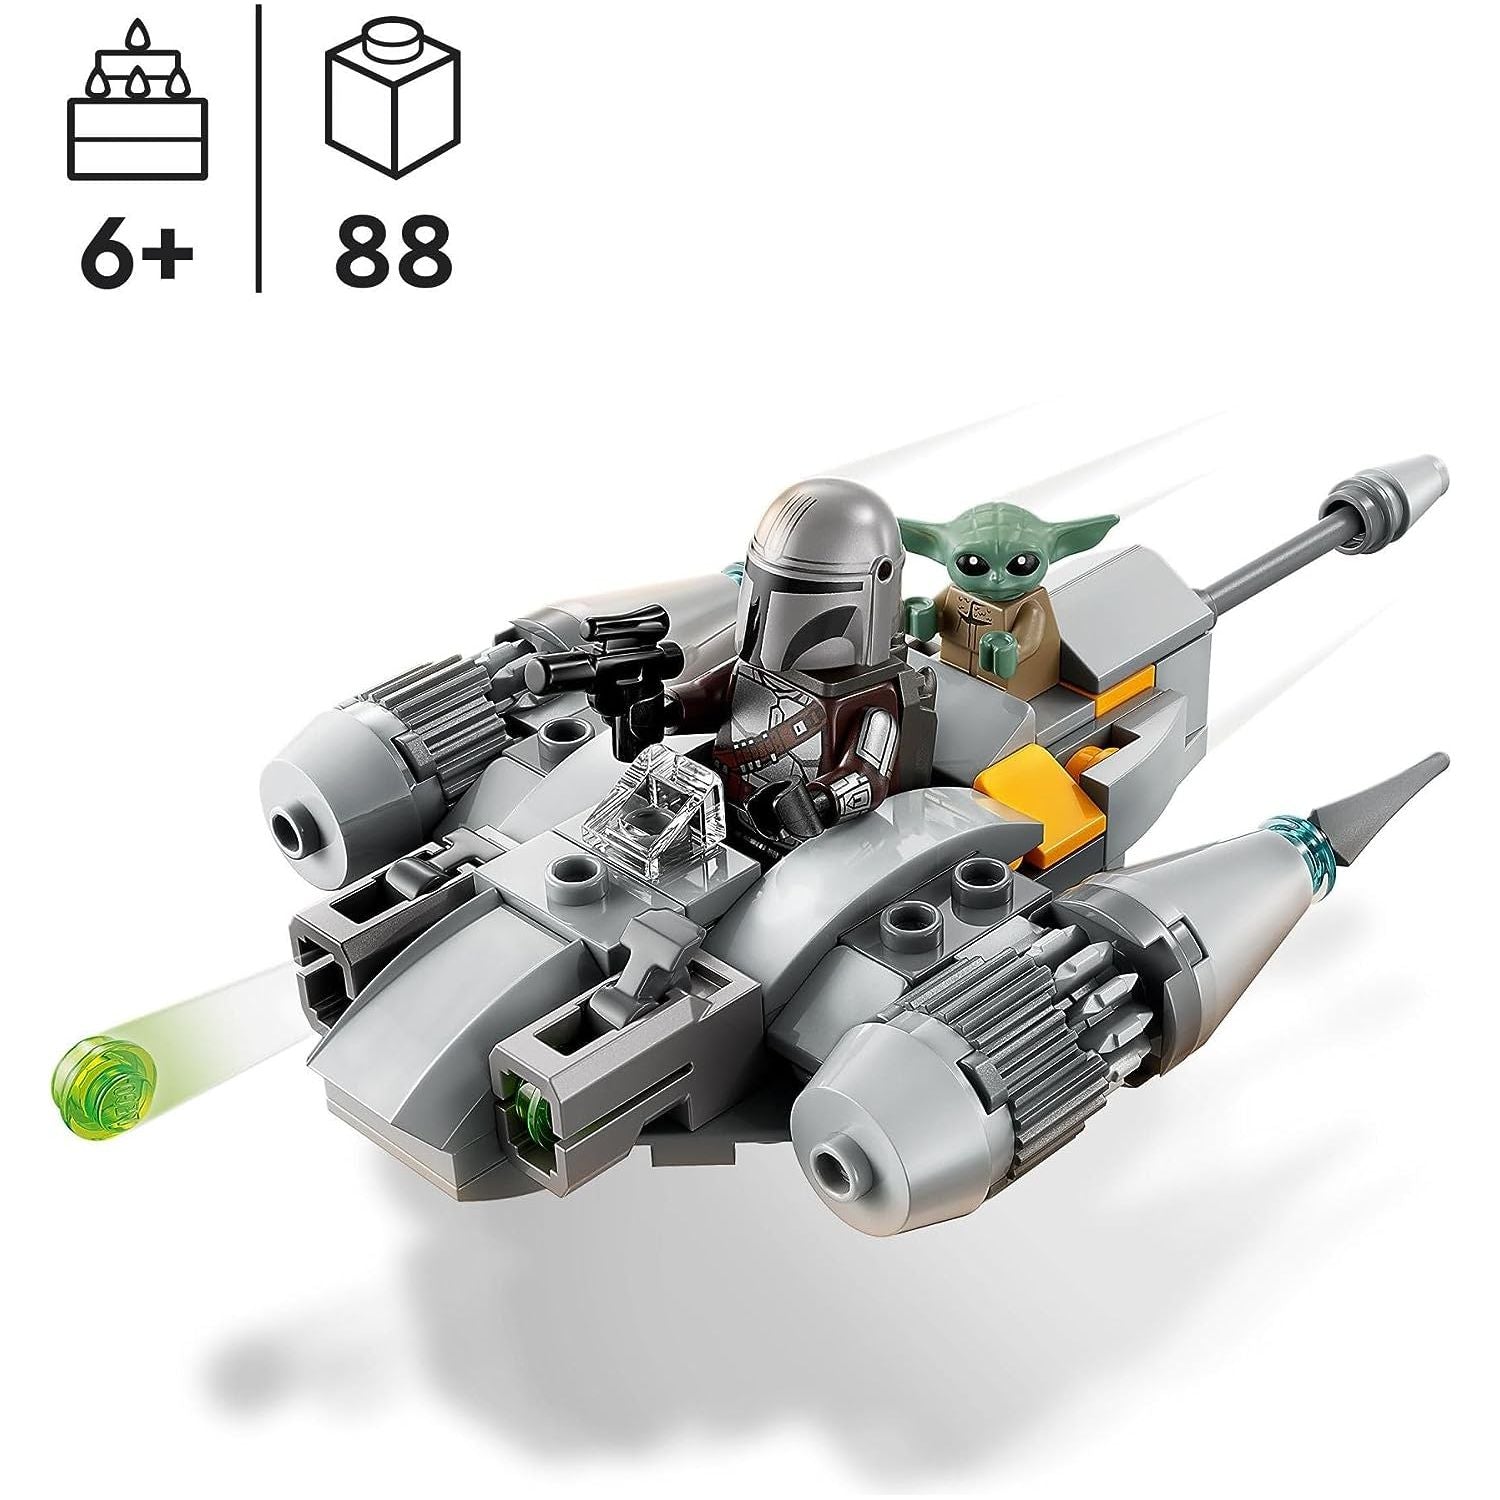 LEGO 75363 Star Wars The Mandalorian’s N-1 Starfighter Microfighter Building Toy Set with Mando and Grogu 'Baby Yoda' Minifigures